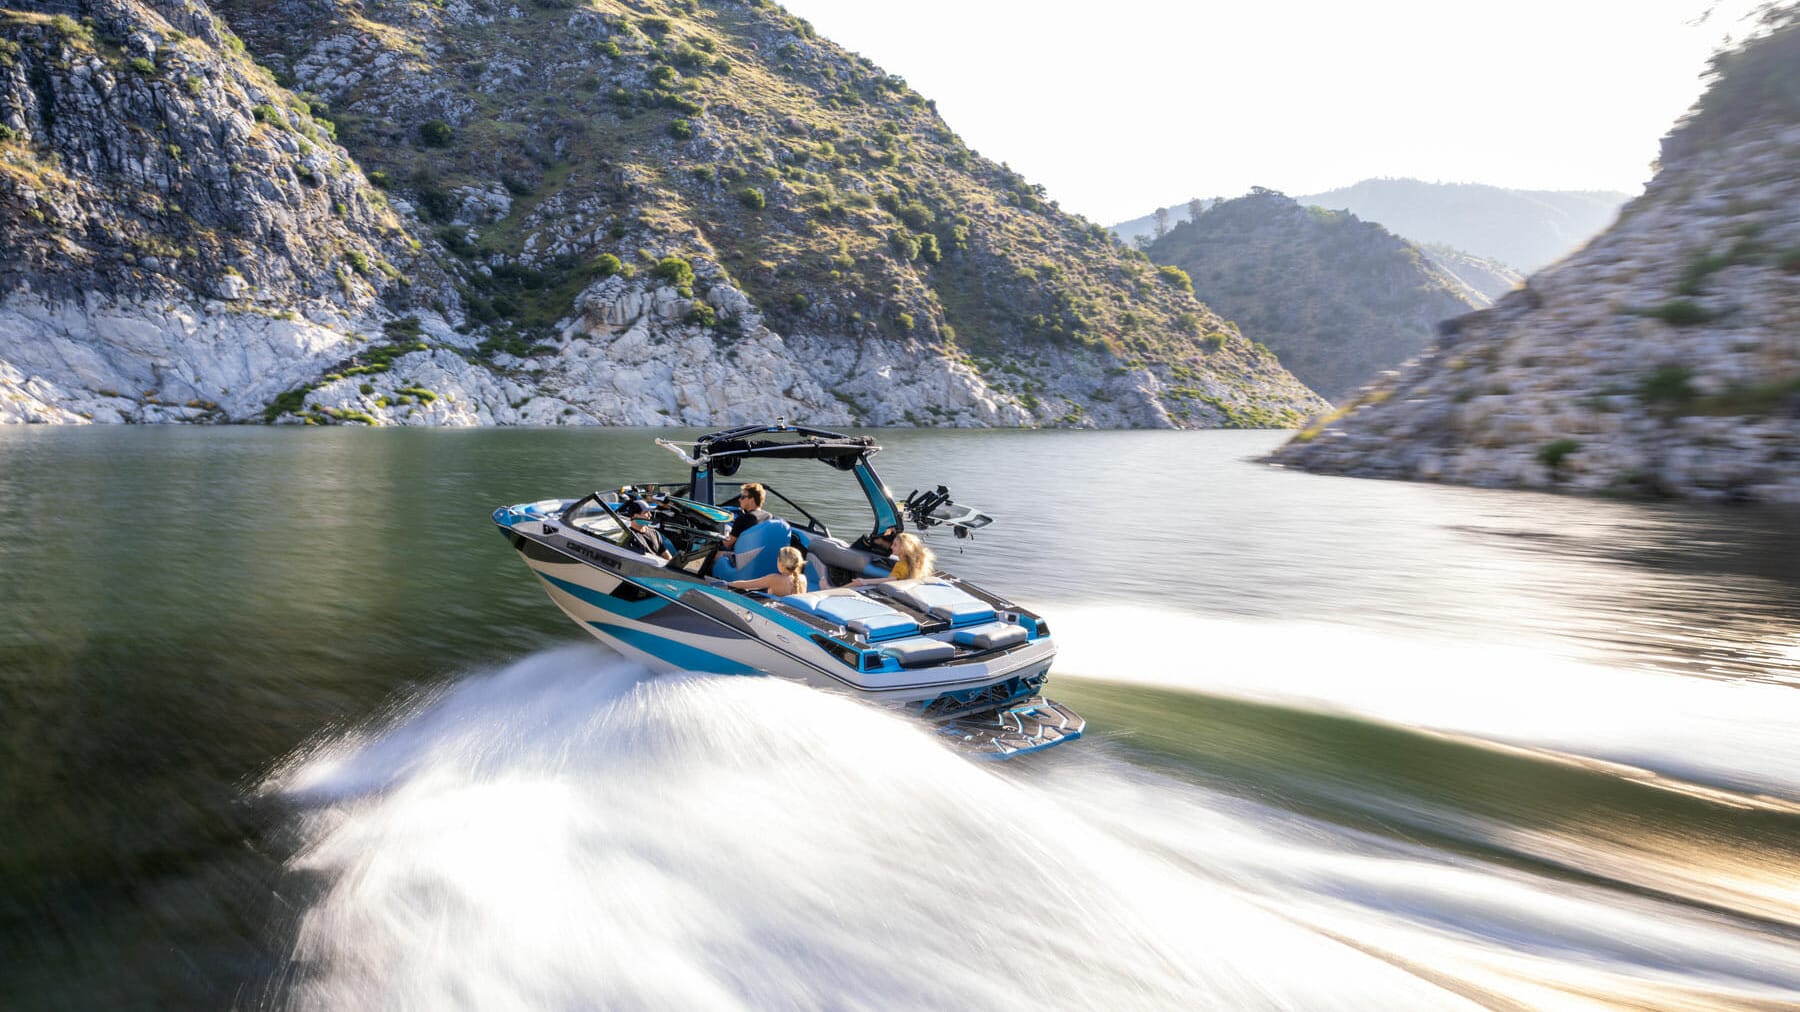 A person is riding a jet ski on a river.